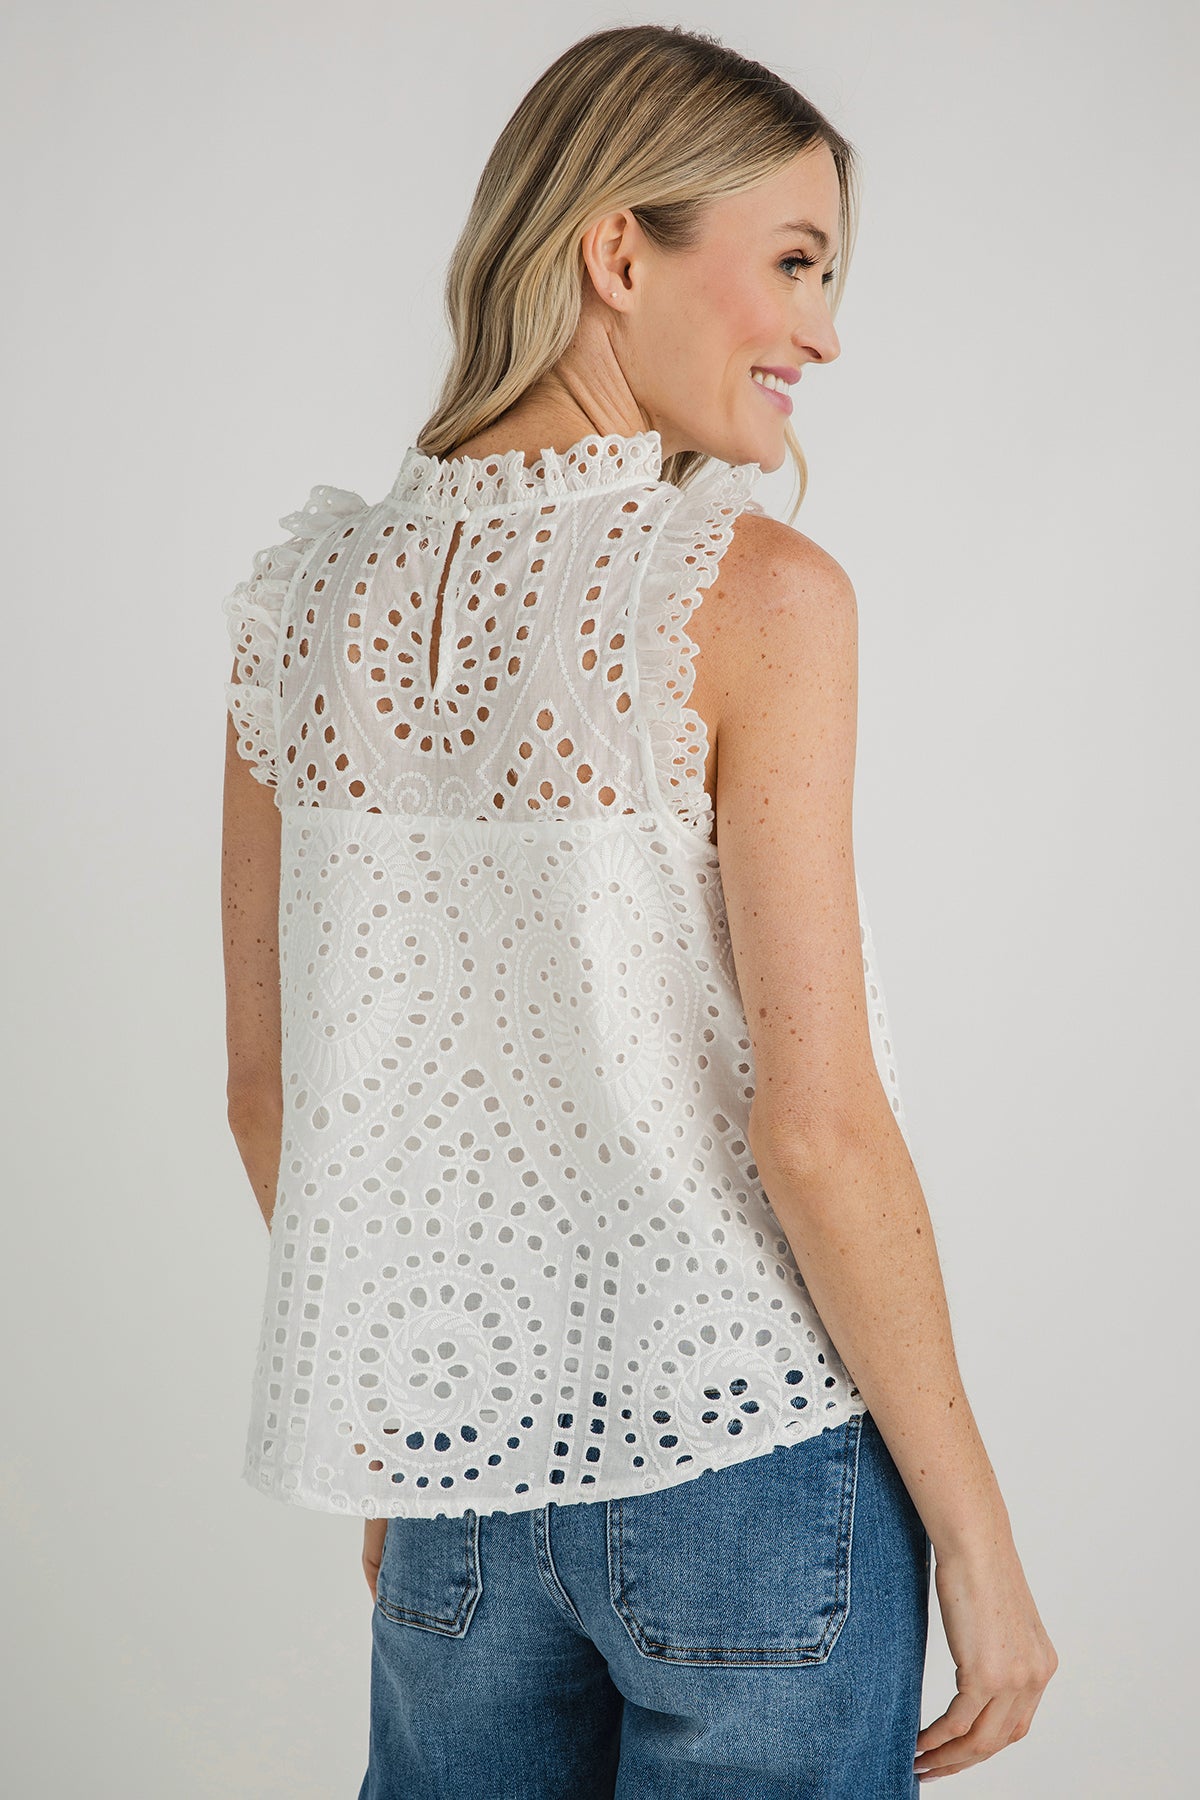 Skies Are Blue Sleeveless Eyelet Lace Top – Social Threads